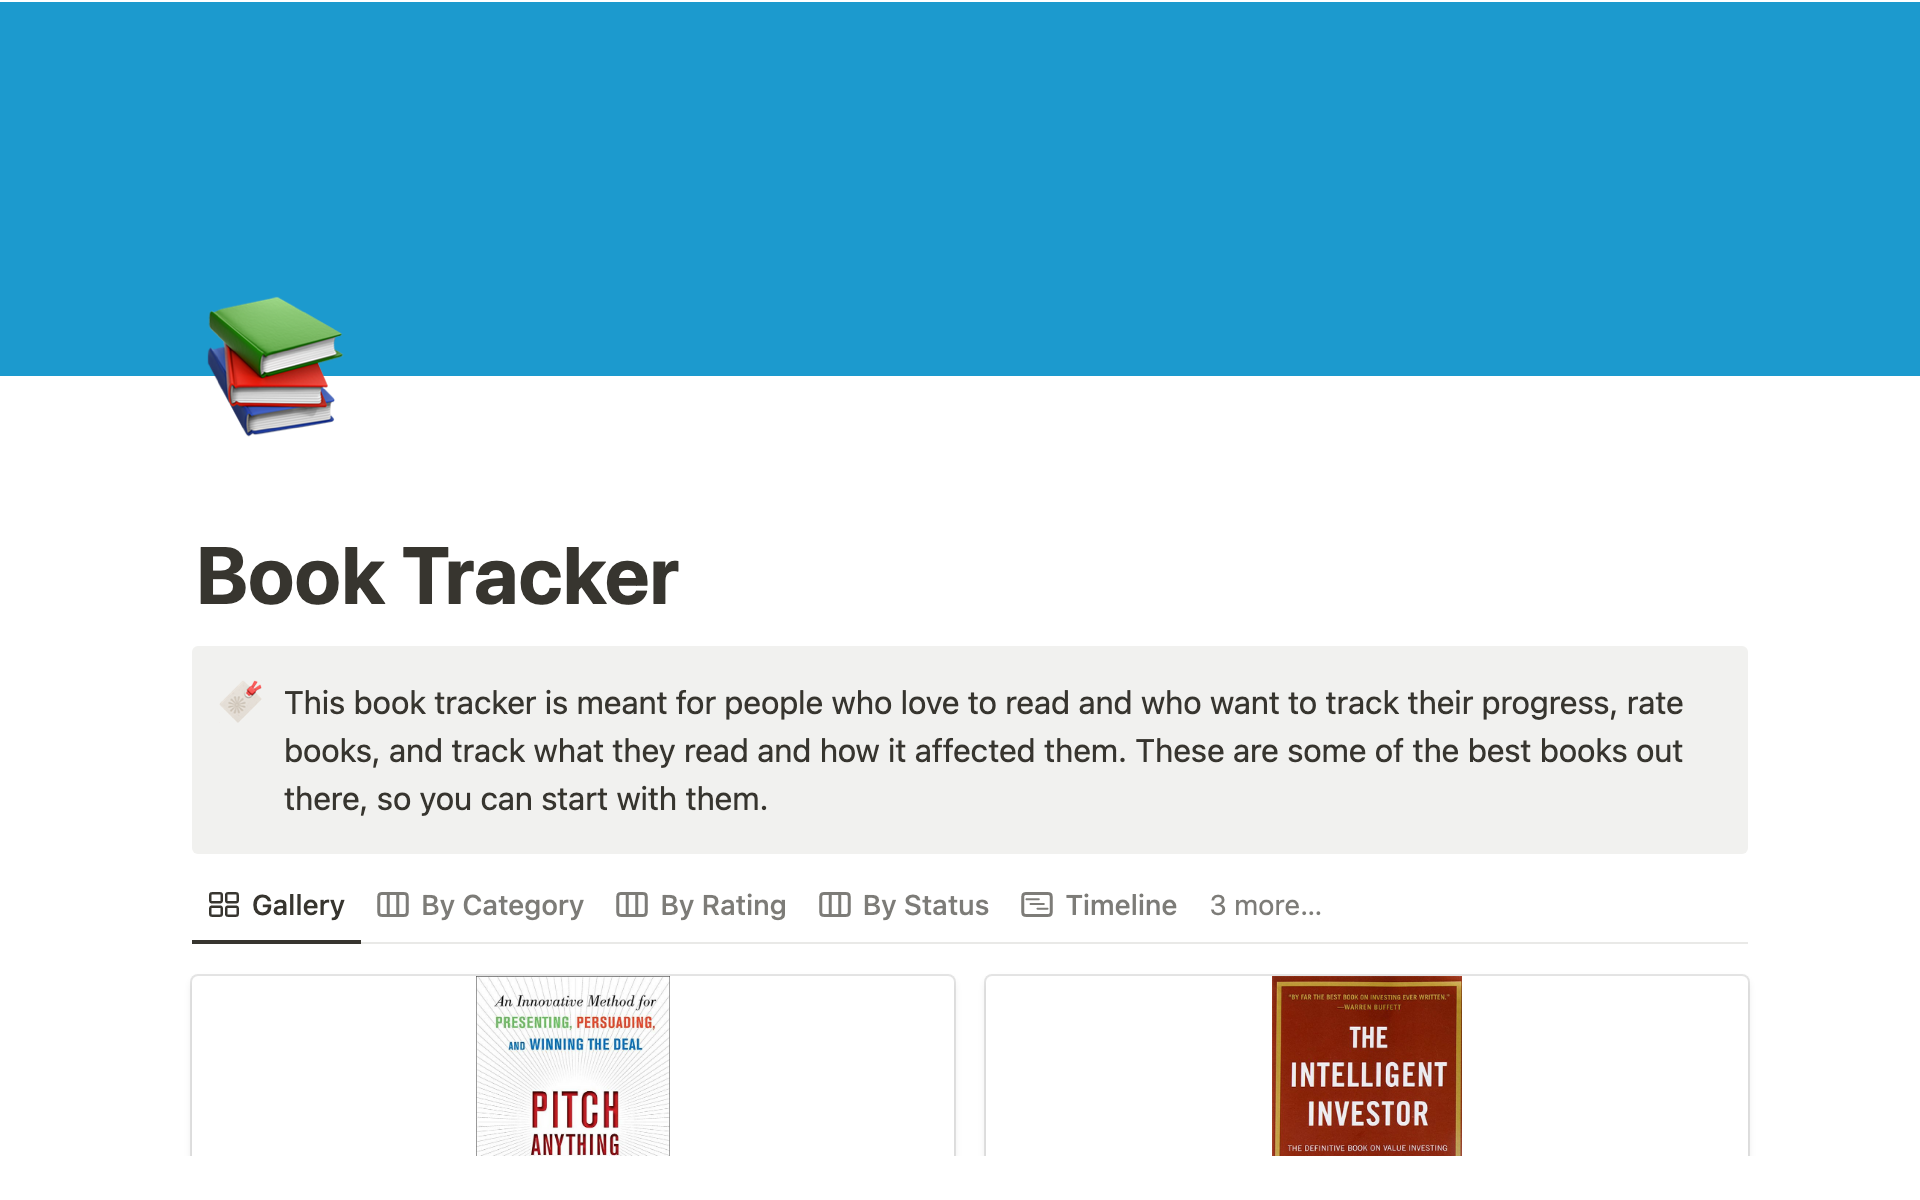 The Book Tracker Notion template helps users keep track of the books they read. This template allows users to categorize and rate books, as well as track their progress.